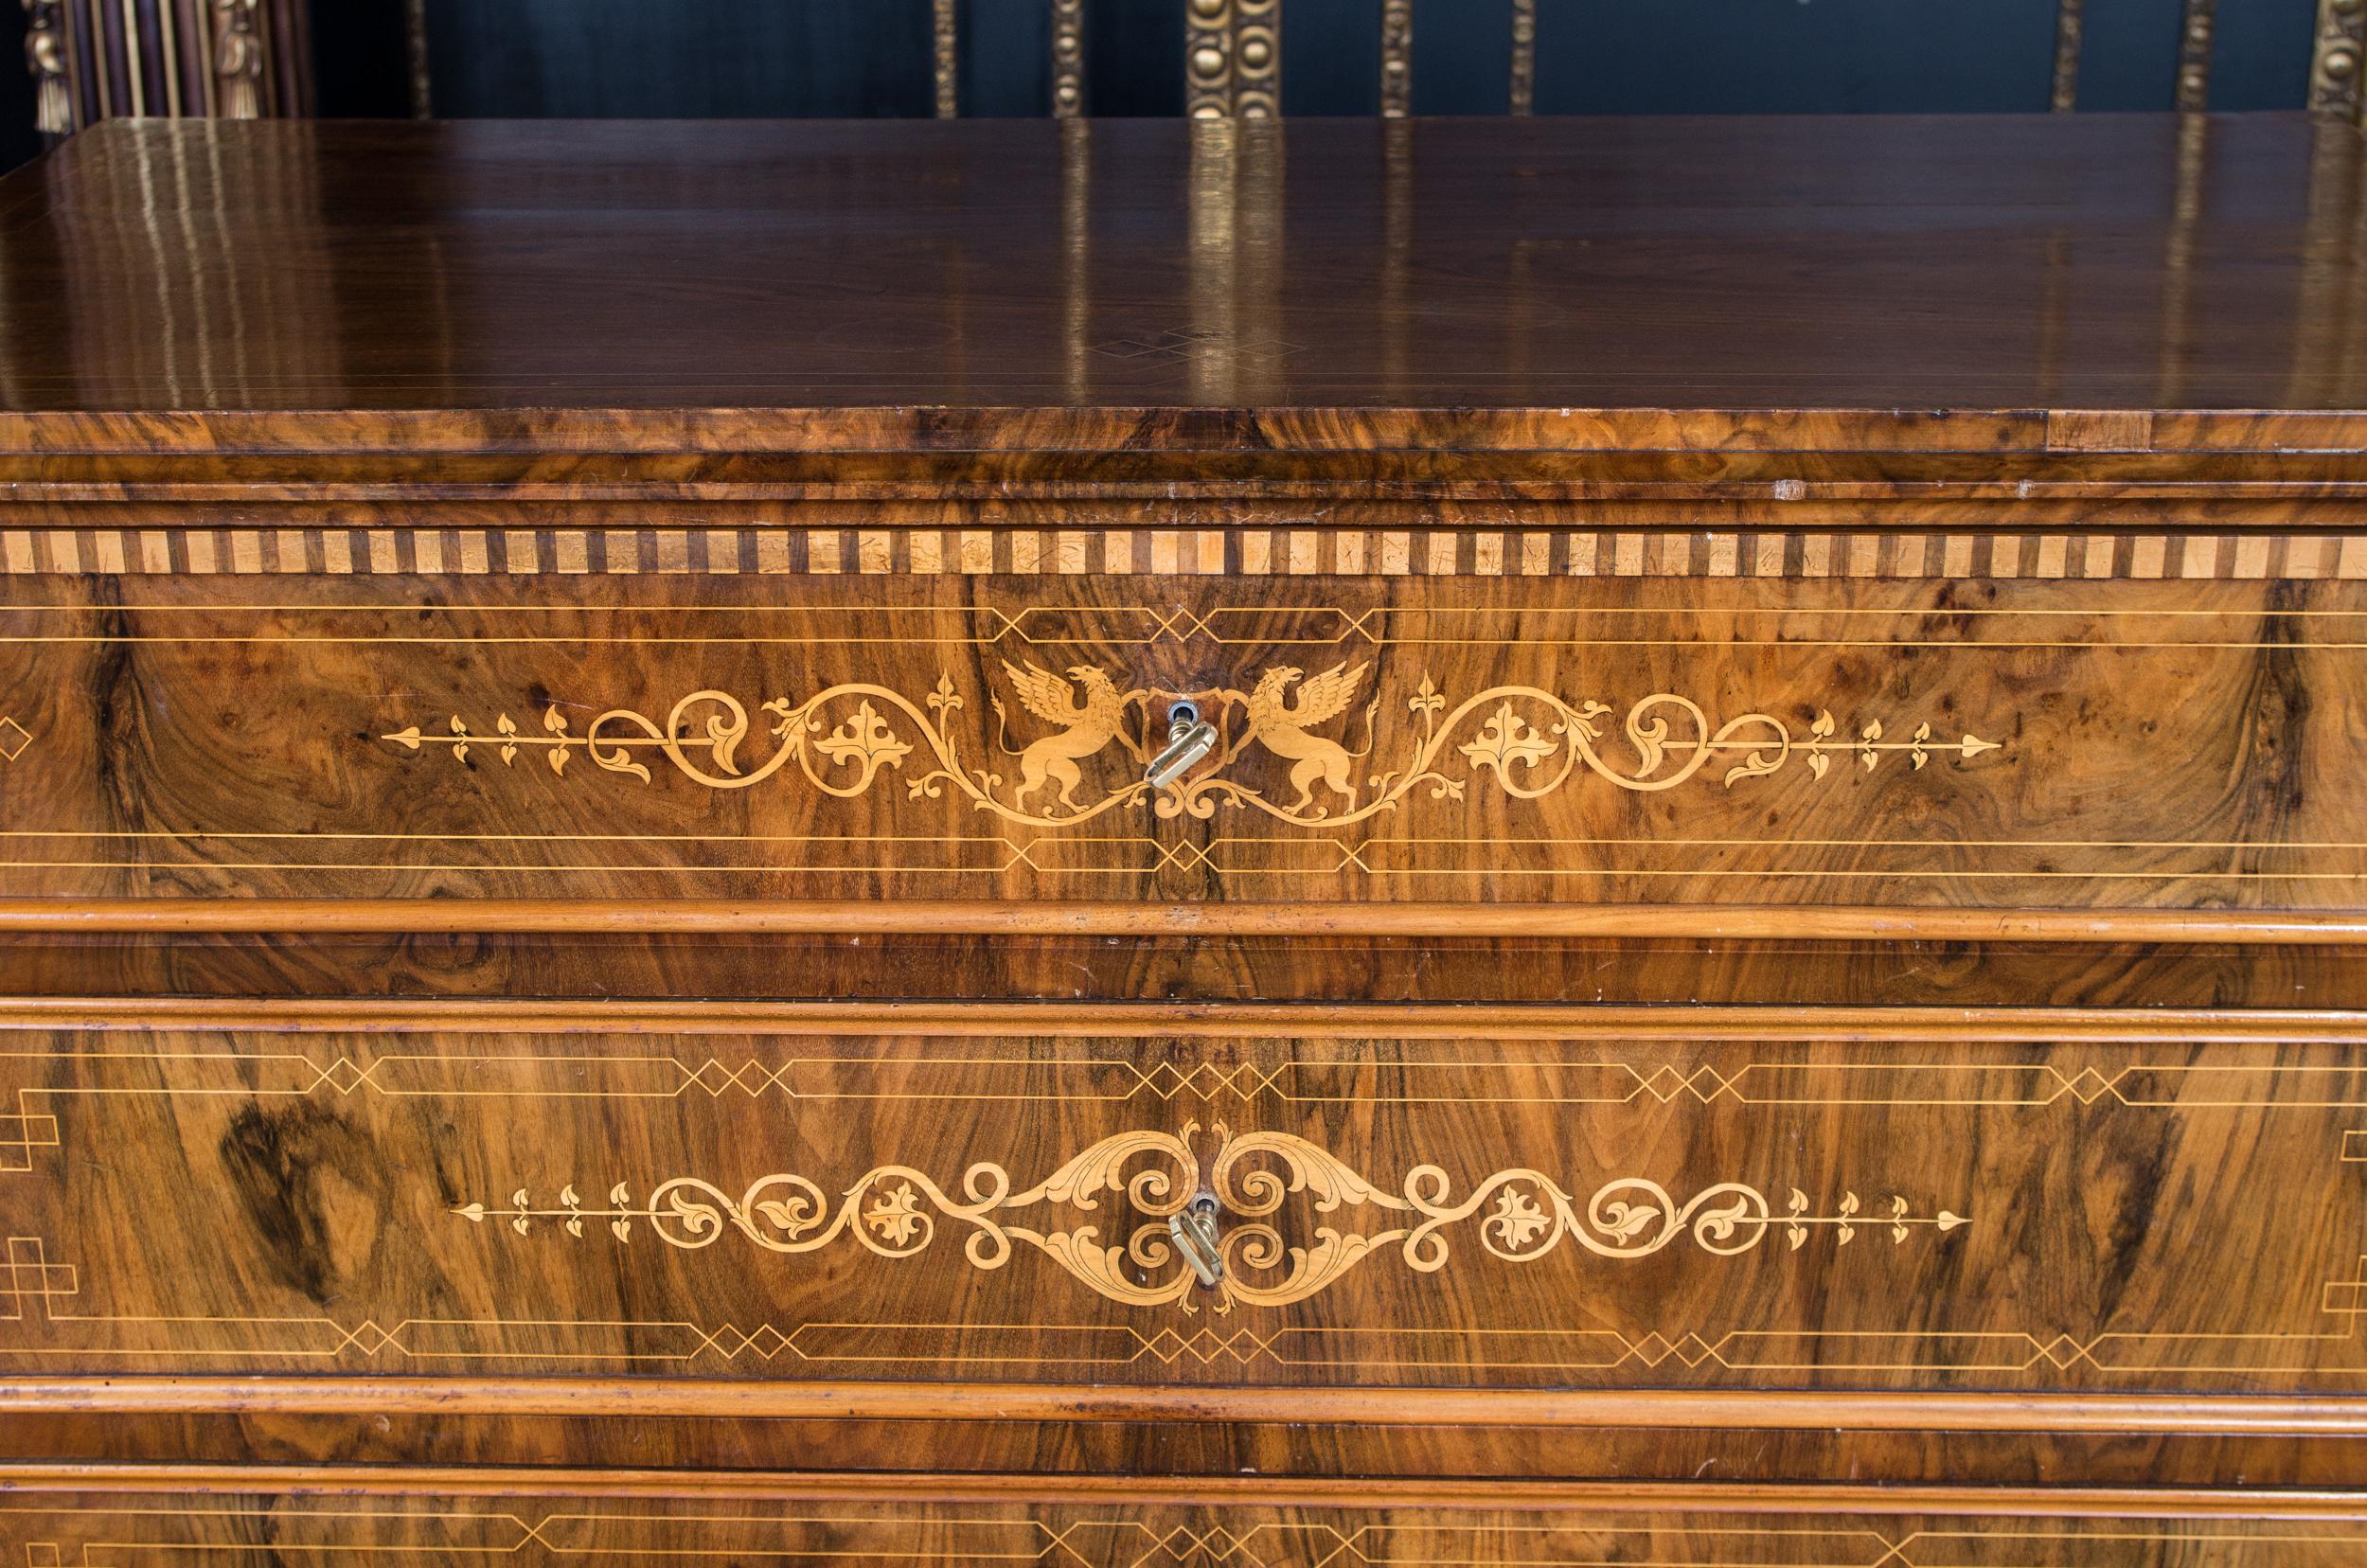 Walnut Biedermeier Writing Commode and Chest of Drawers circa 1850 with Fine Inlays